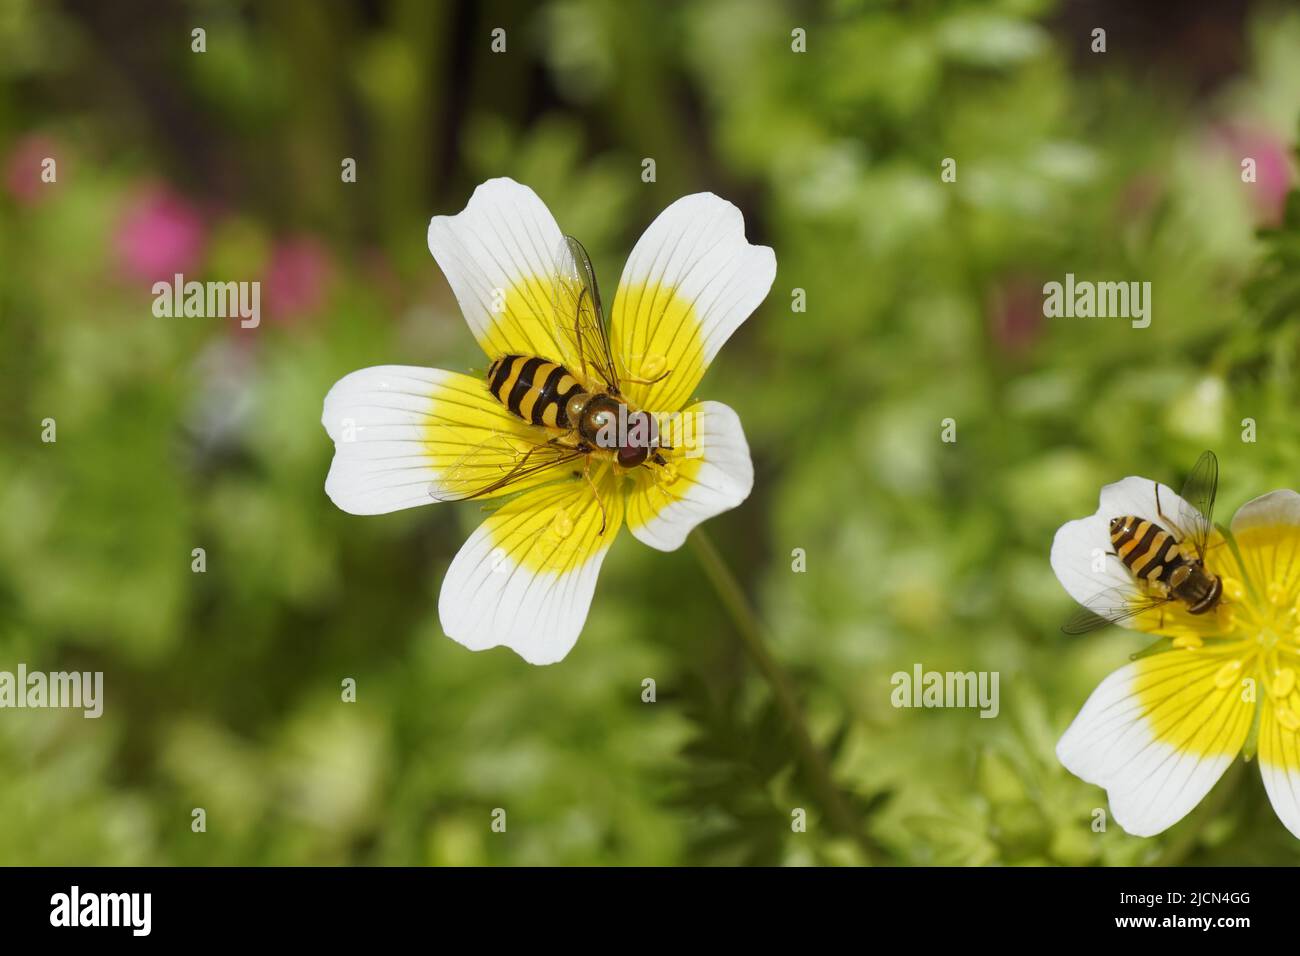 Hoverflies Epistrophe, family Syrphidae on flowers of Douglas' meadowfoam, poached egg plant (Limnanthes douglasii), family meadowfoam (Limnanthaceae) Stock Photo